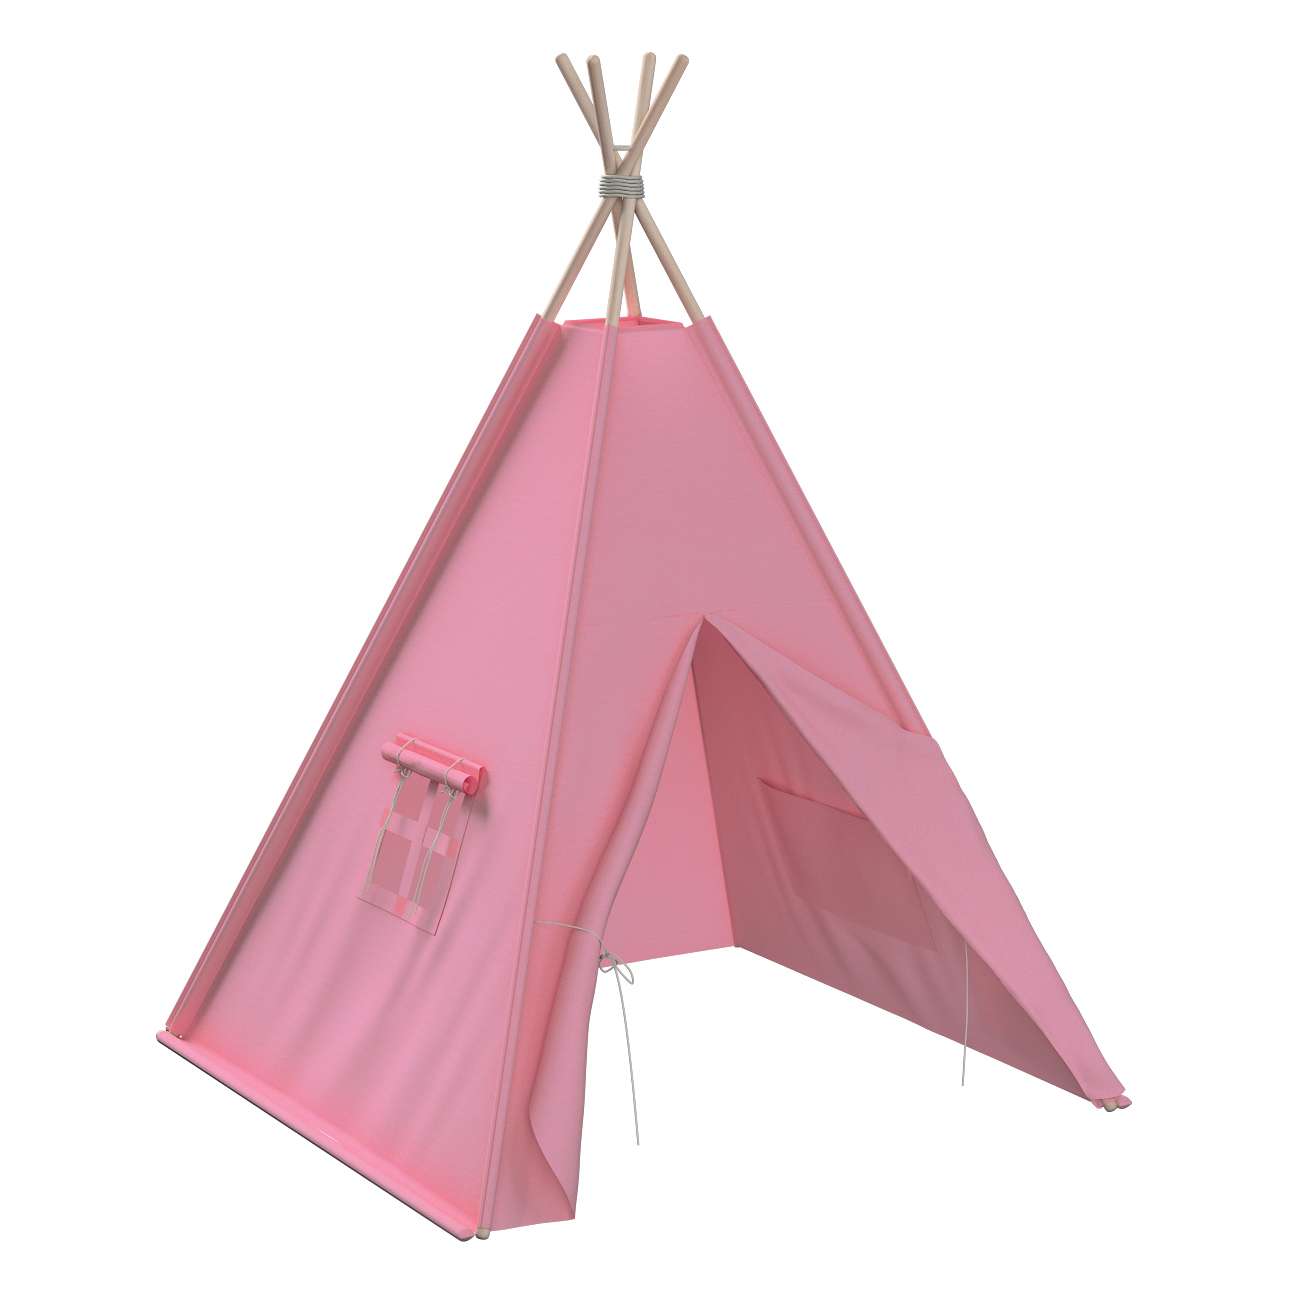 Tepee - 110x110x155cm (Happiness) - old rose